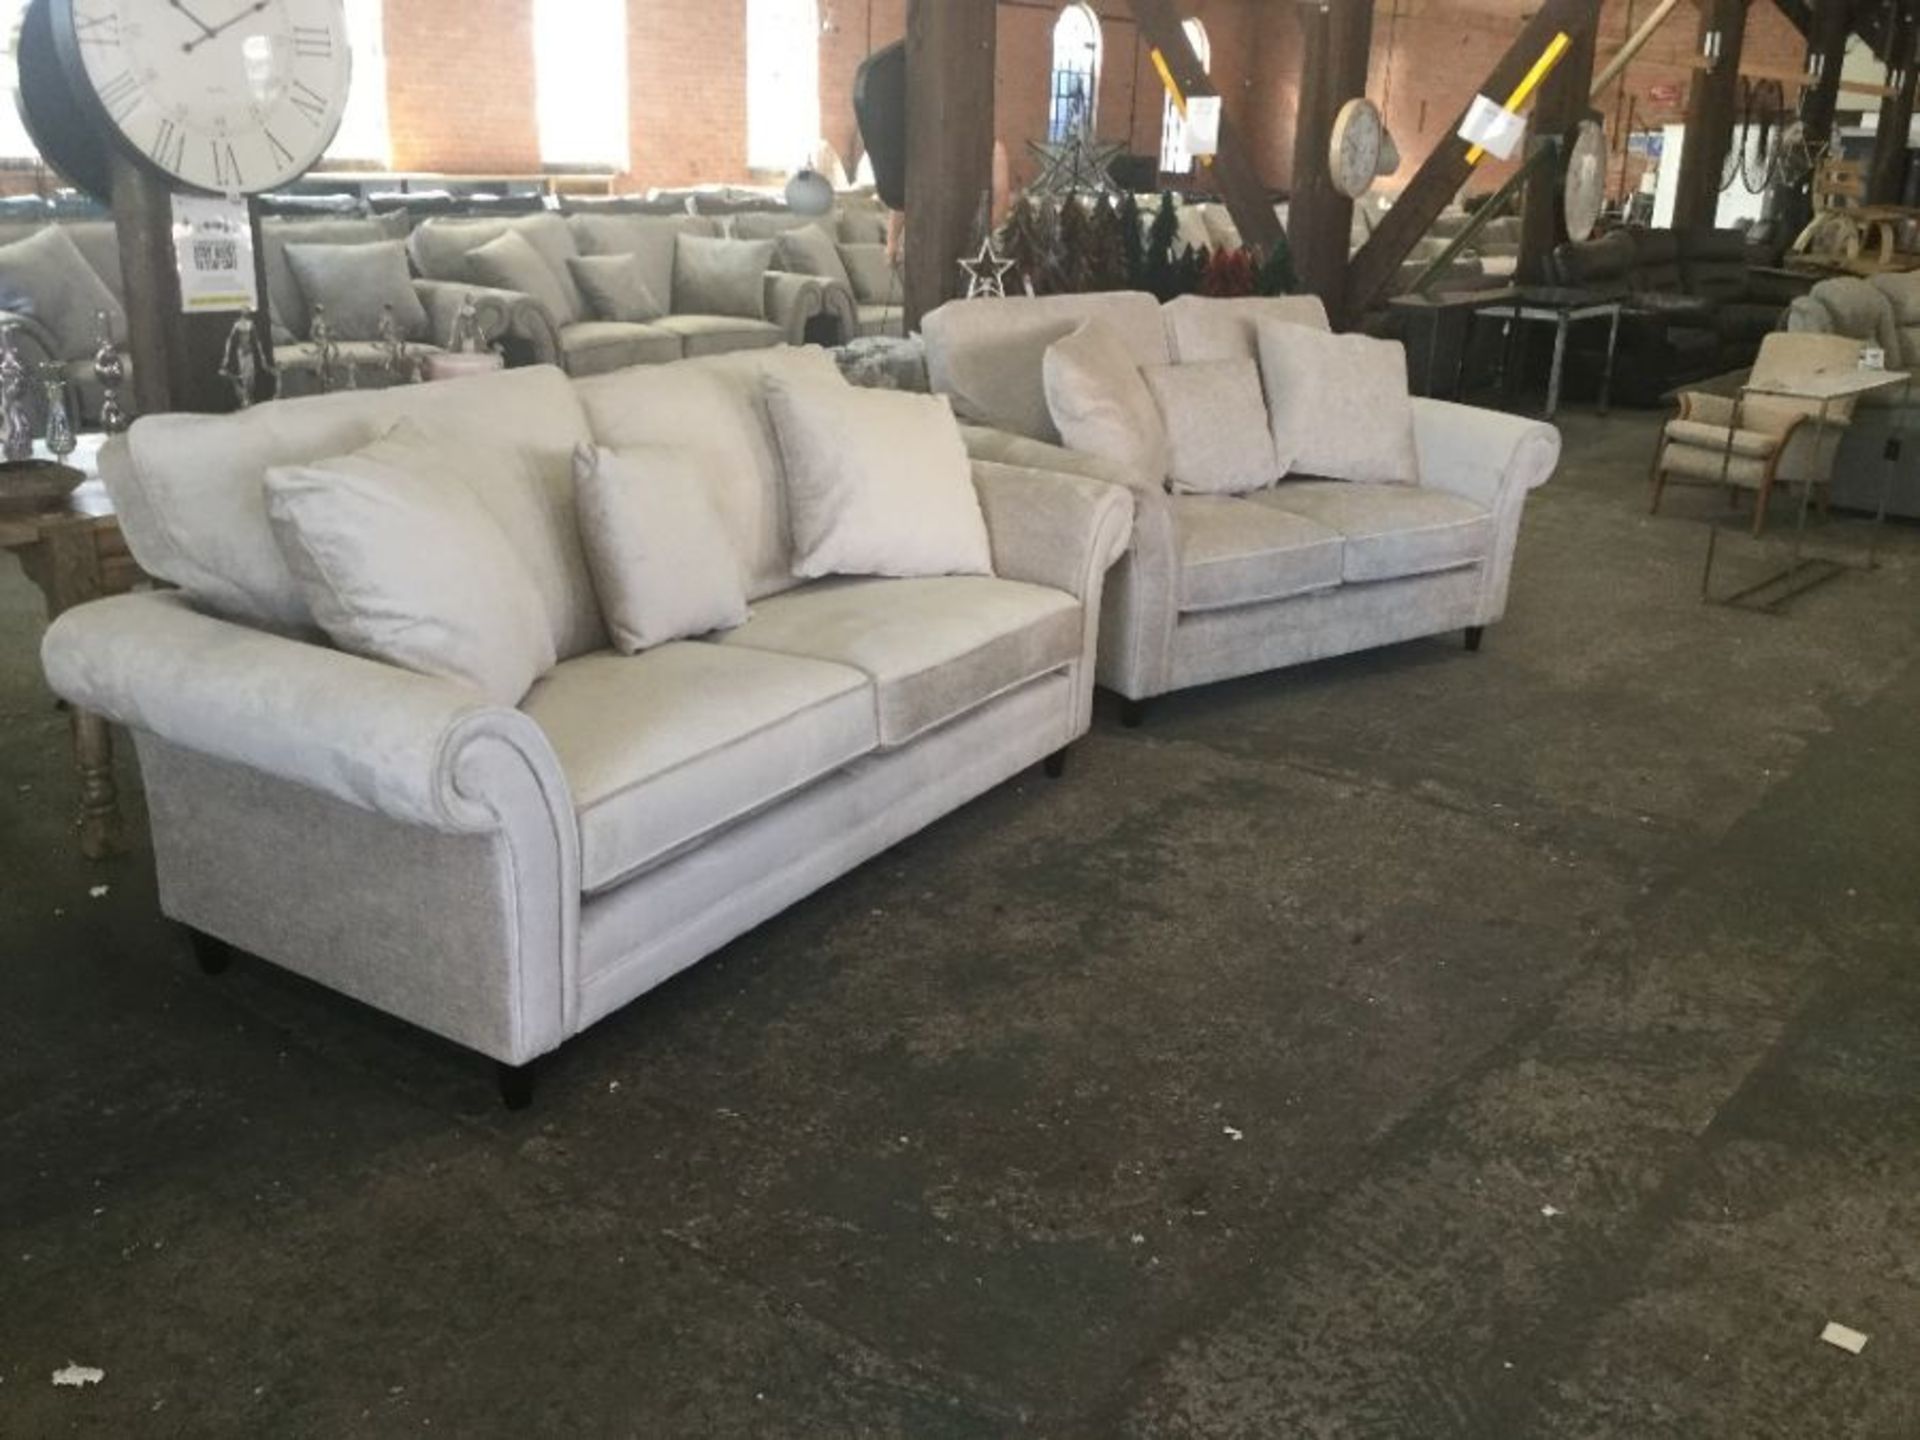 MOSTA COSTELLO OYSTER 4 SEATER SOFA AND 2 SEATER